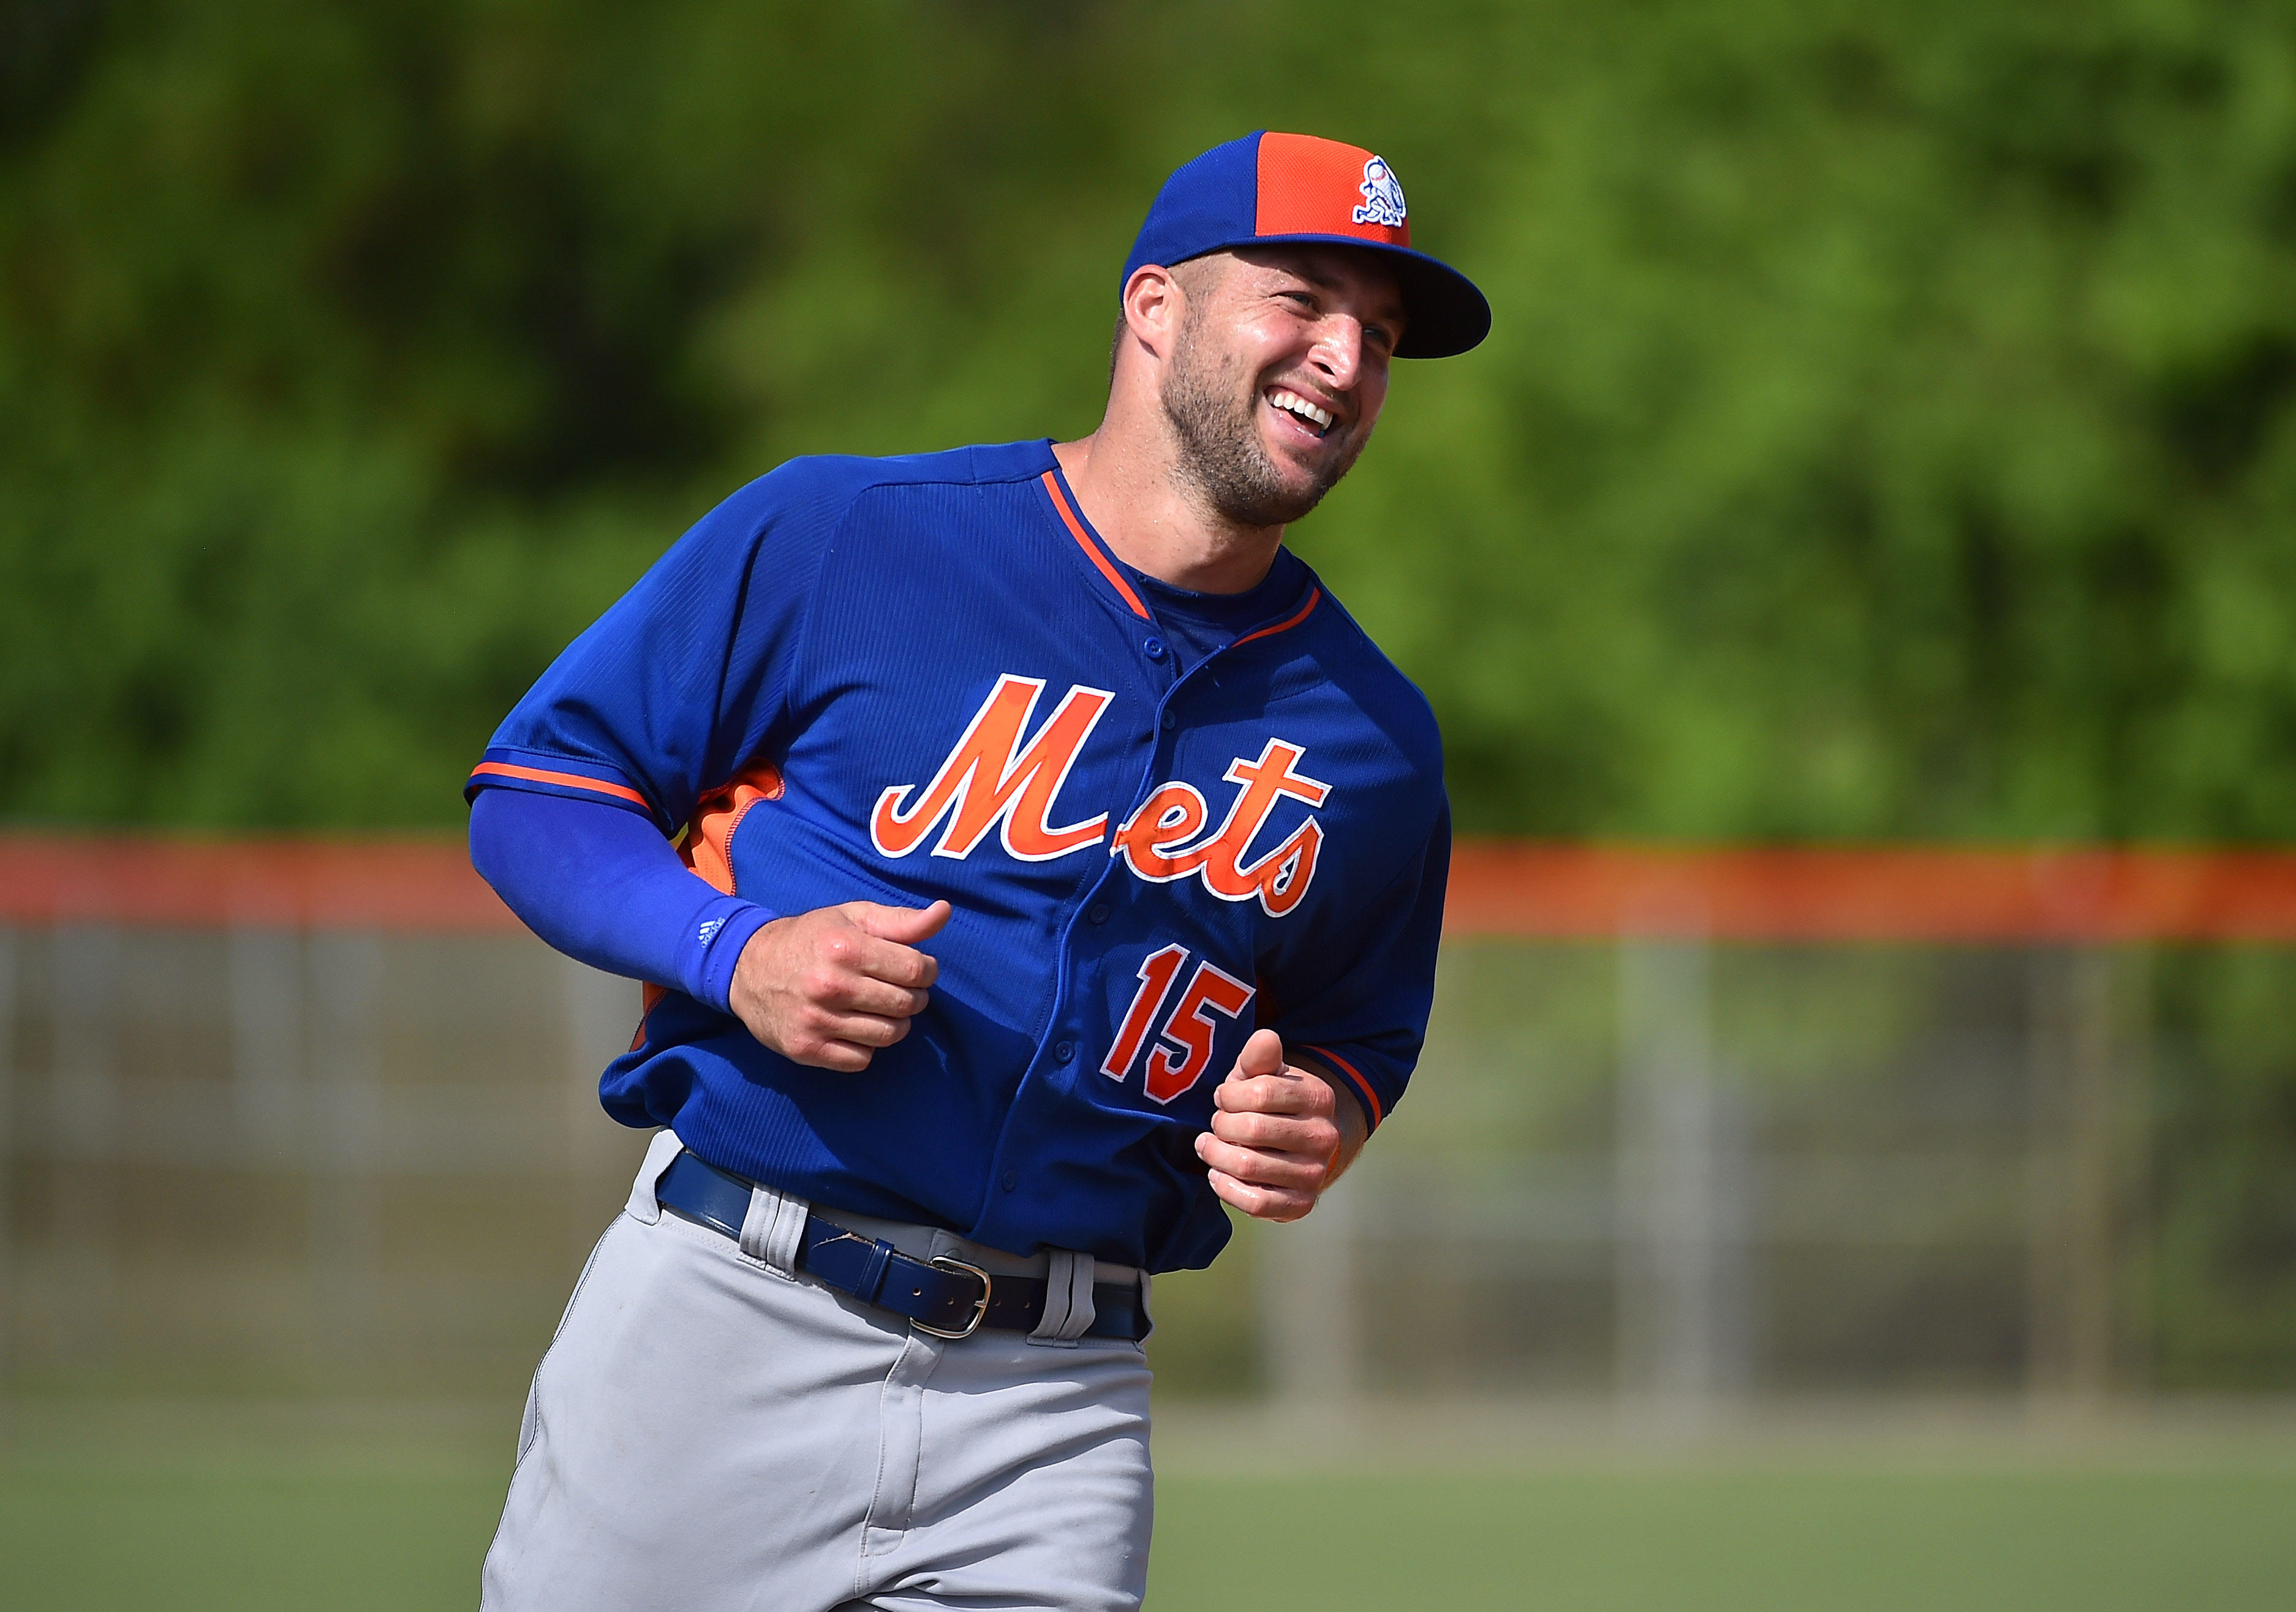 Tim Tebow comes to fan's aid in medical emergency - CBS News